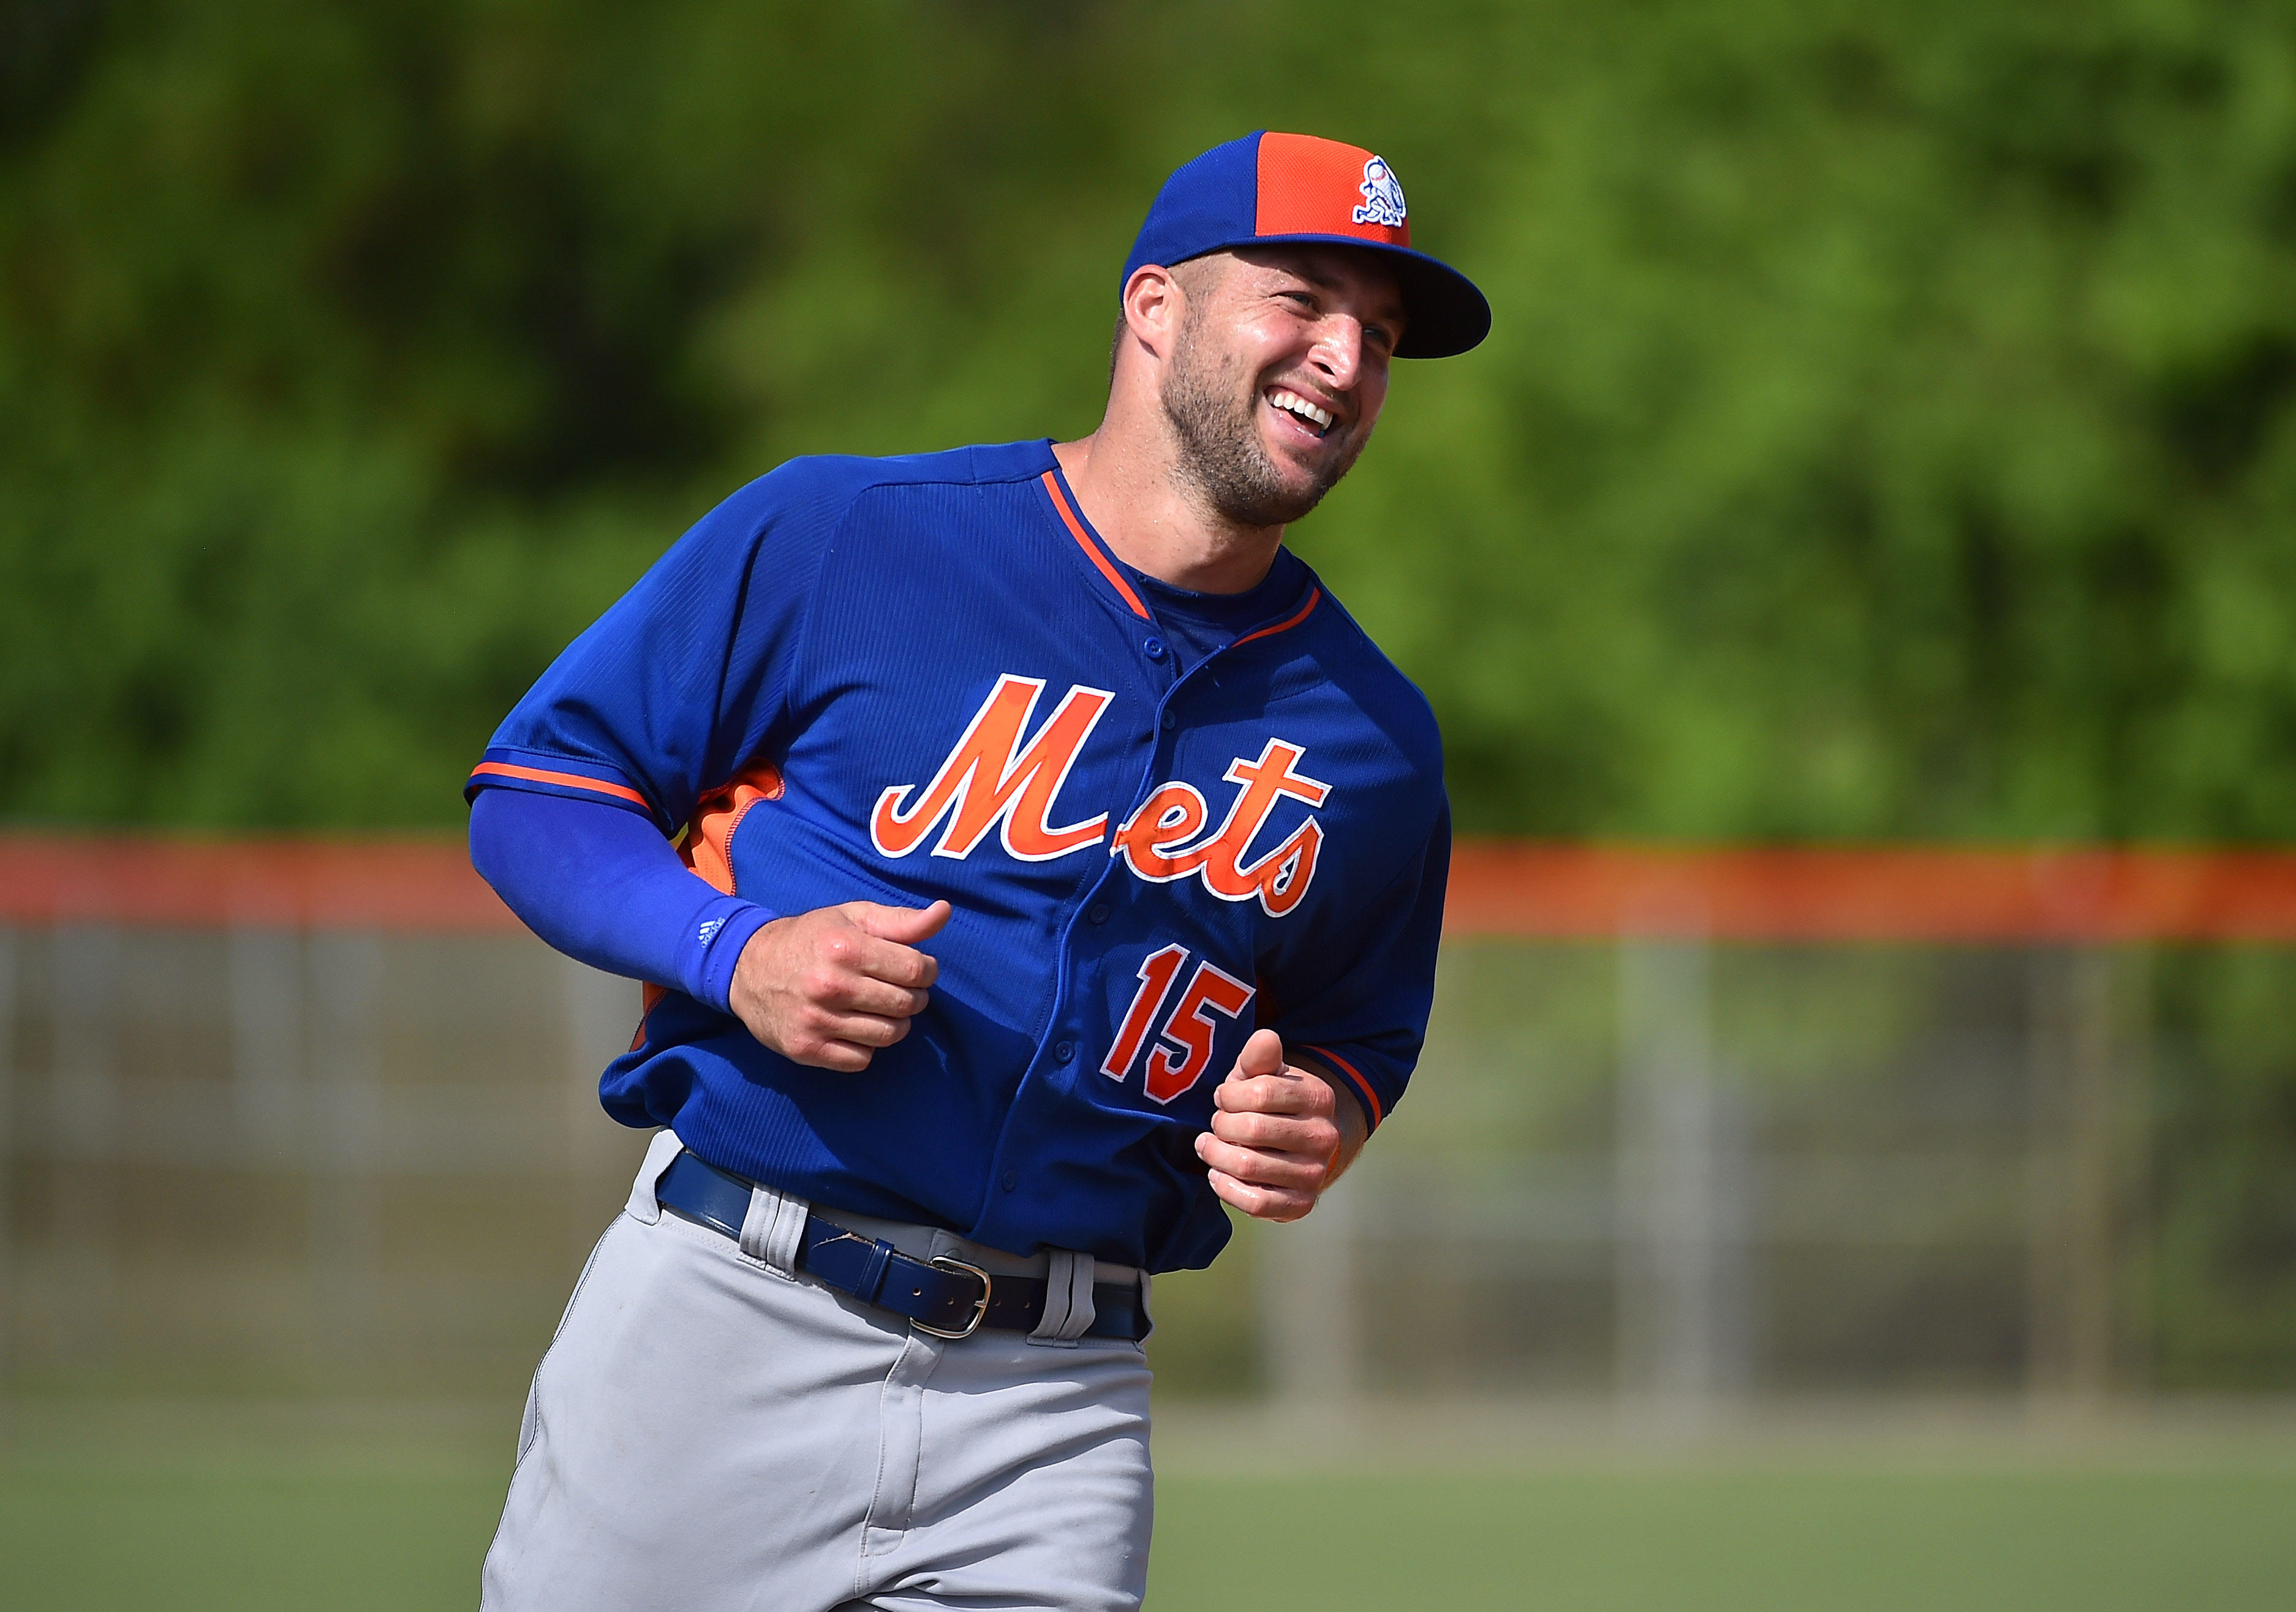 Tim Tebow comes to fan's aid in medical emergency - CBS News